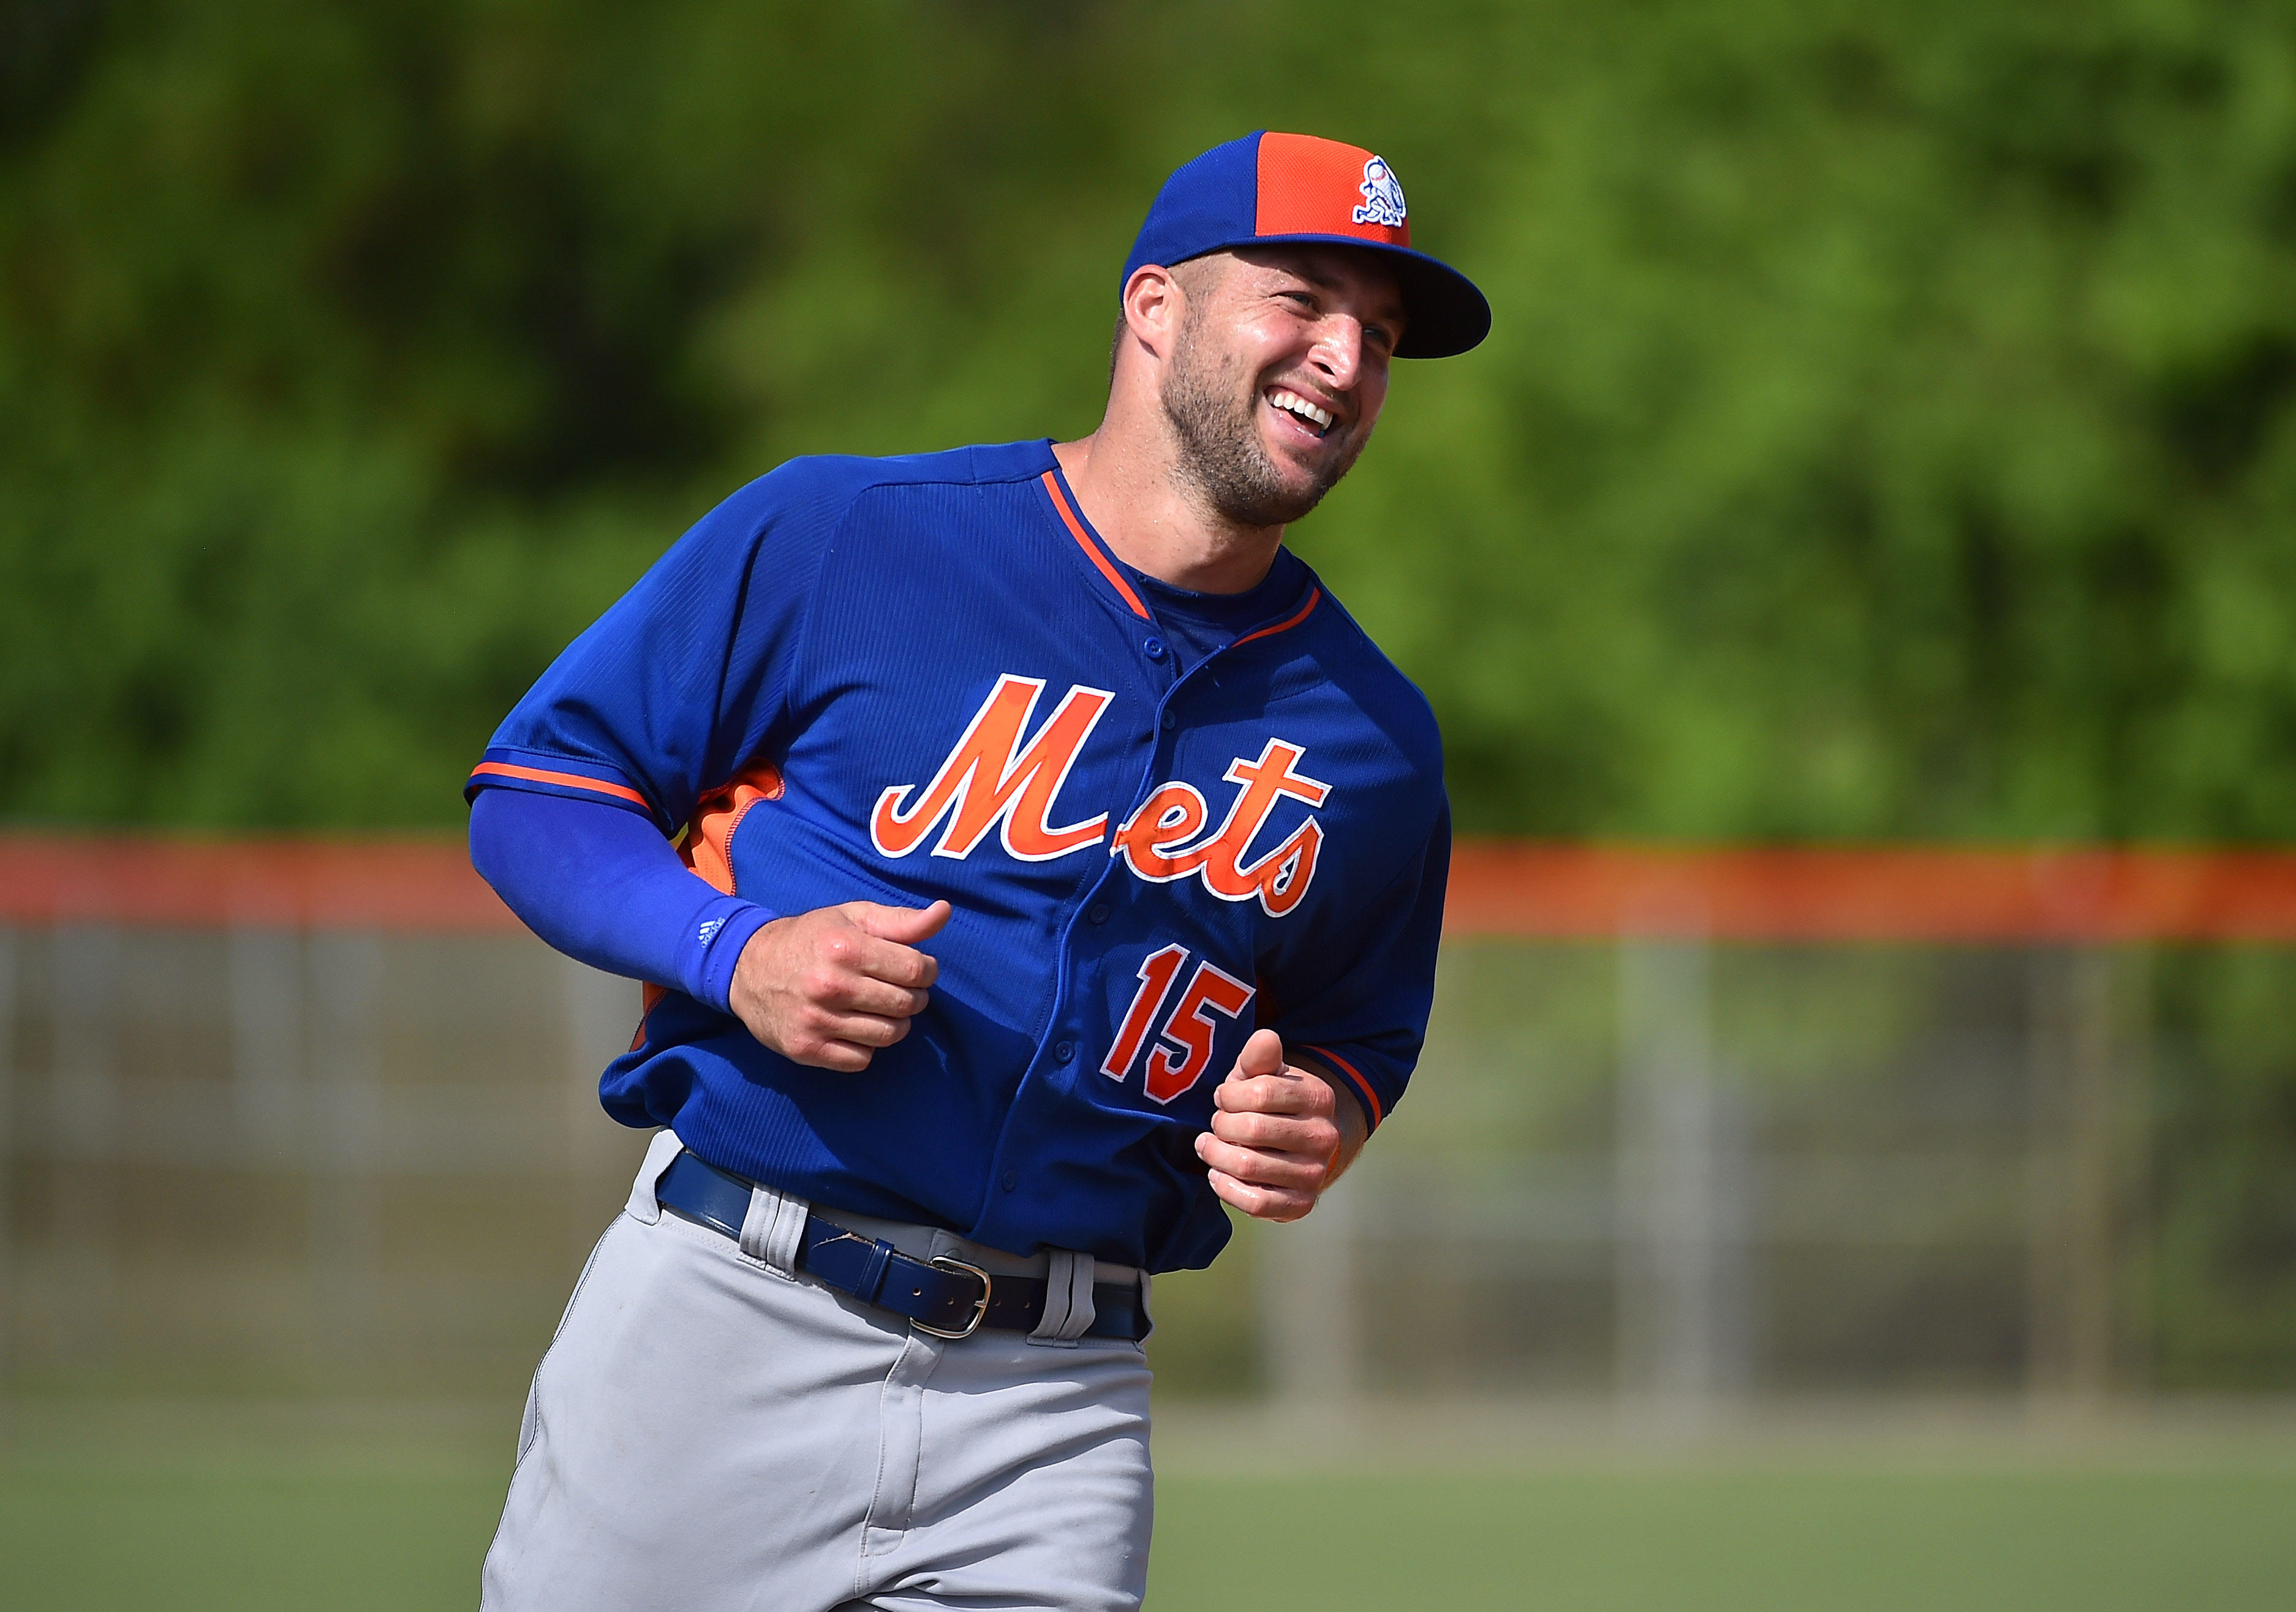 Tim Tebow comes to fan's aid in medical emergency - CBS News